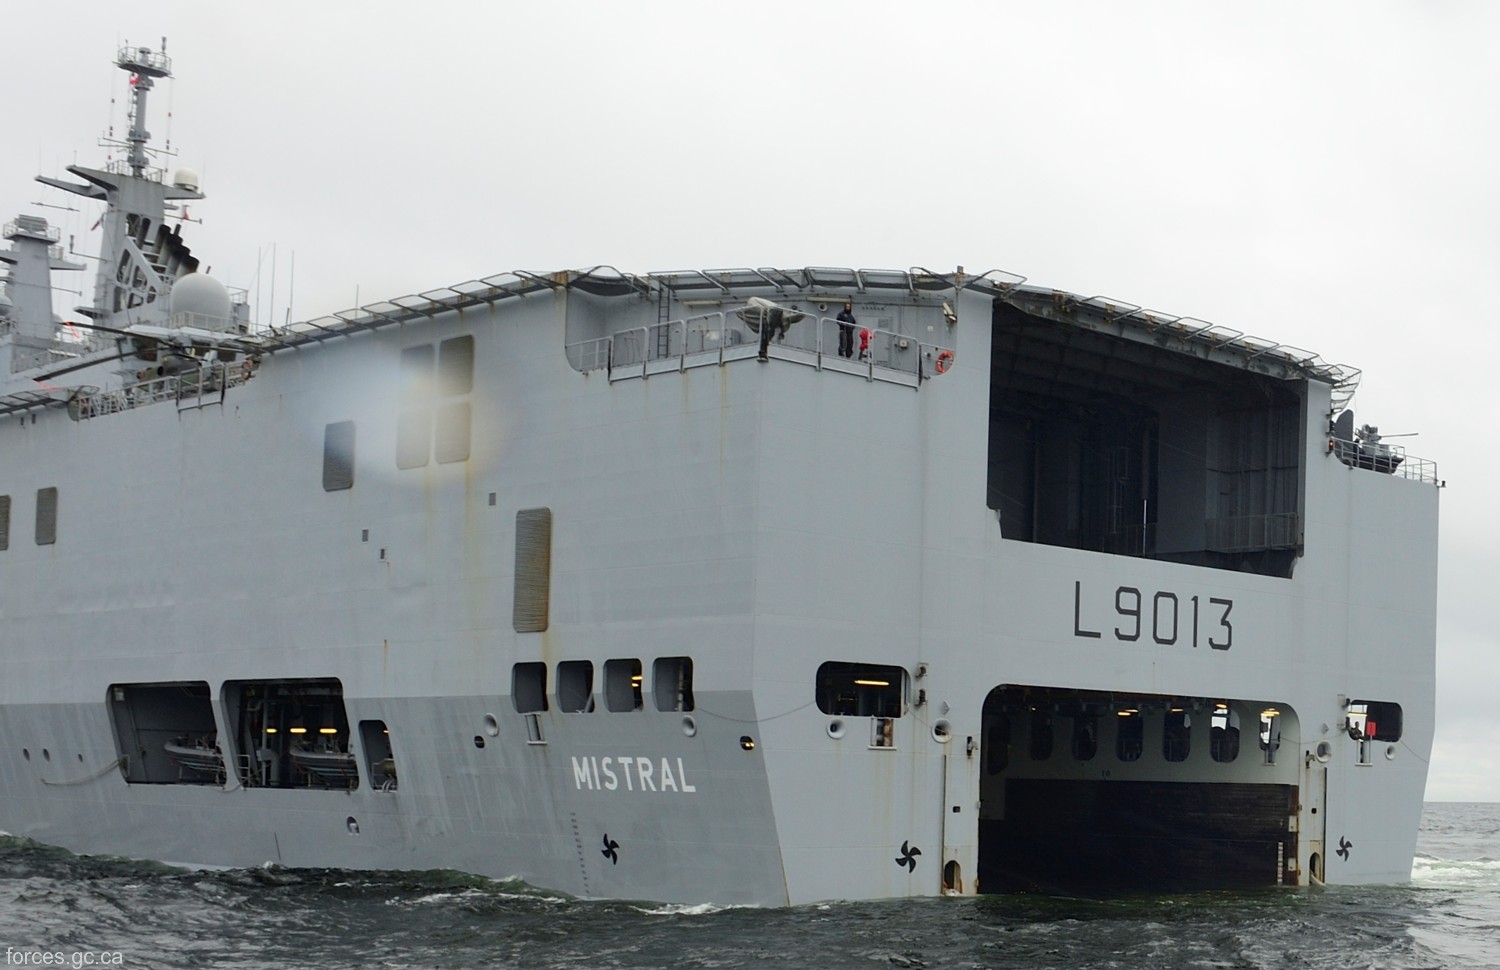 l-9013 fs mistral amphibious assault command ship french navy marine nationale 43 well deck